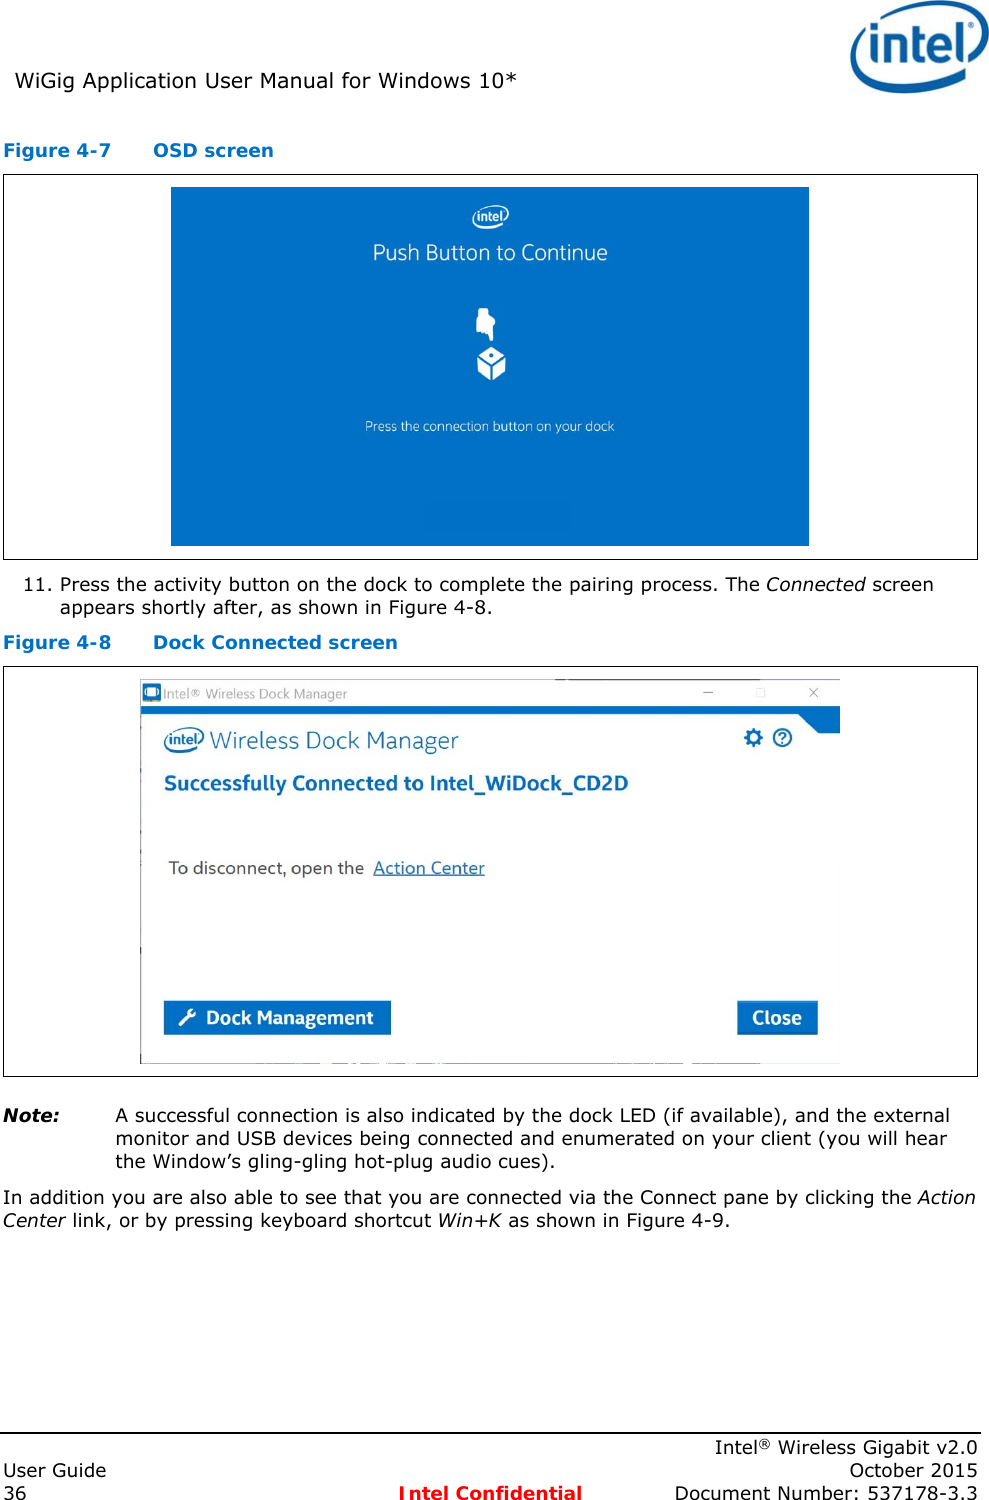 WiGig Application User Manual for Windows 10*      Intel® Wireless Gigabit v2.0 User Guide    October 2015 36 Intel Confidential  Document Number: 537178-3.3 Figure 4-7  OSD screen  11. Press the activity button on the dock to complete the pairing process. The Connected screen appears shortly after, as shown in Figure 4-8. Figure 4-8  Dock Connected screen  Note: A successful connection is also indicated by the dock LED (if available), and the external monitor and USB devices being connected and enumerated on your client (you will hear the Window’s gling-gling hot-plug audio cues).  In addition you are also able to see that you are connected via the Connect pane by clicking the Action Center link, or by pressing keyboard shortcut Win+K as shown in Figure 4-9. 